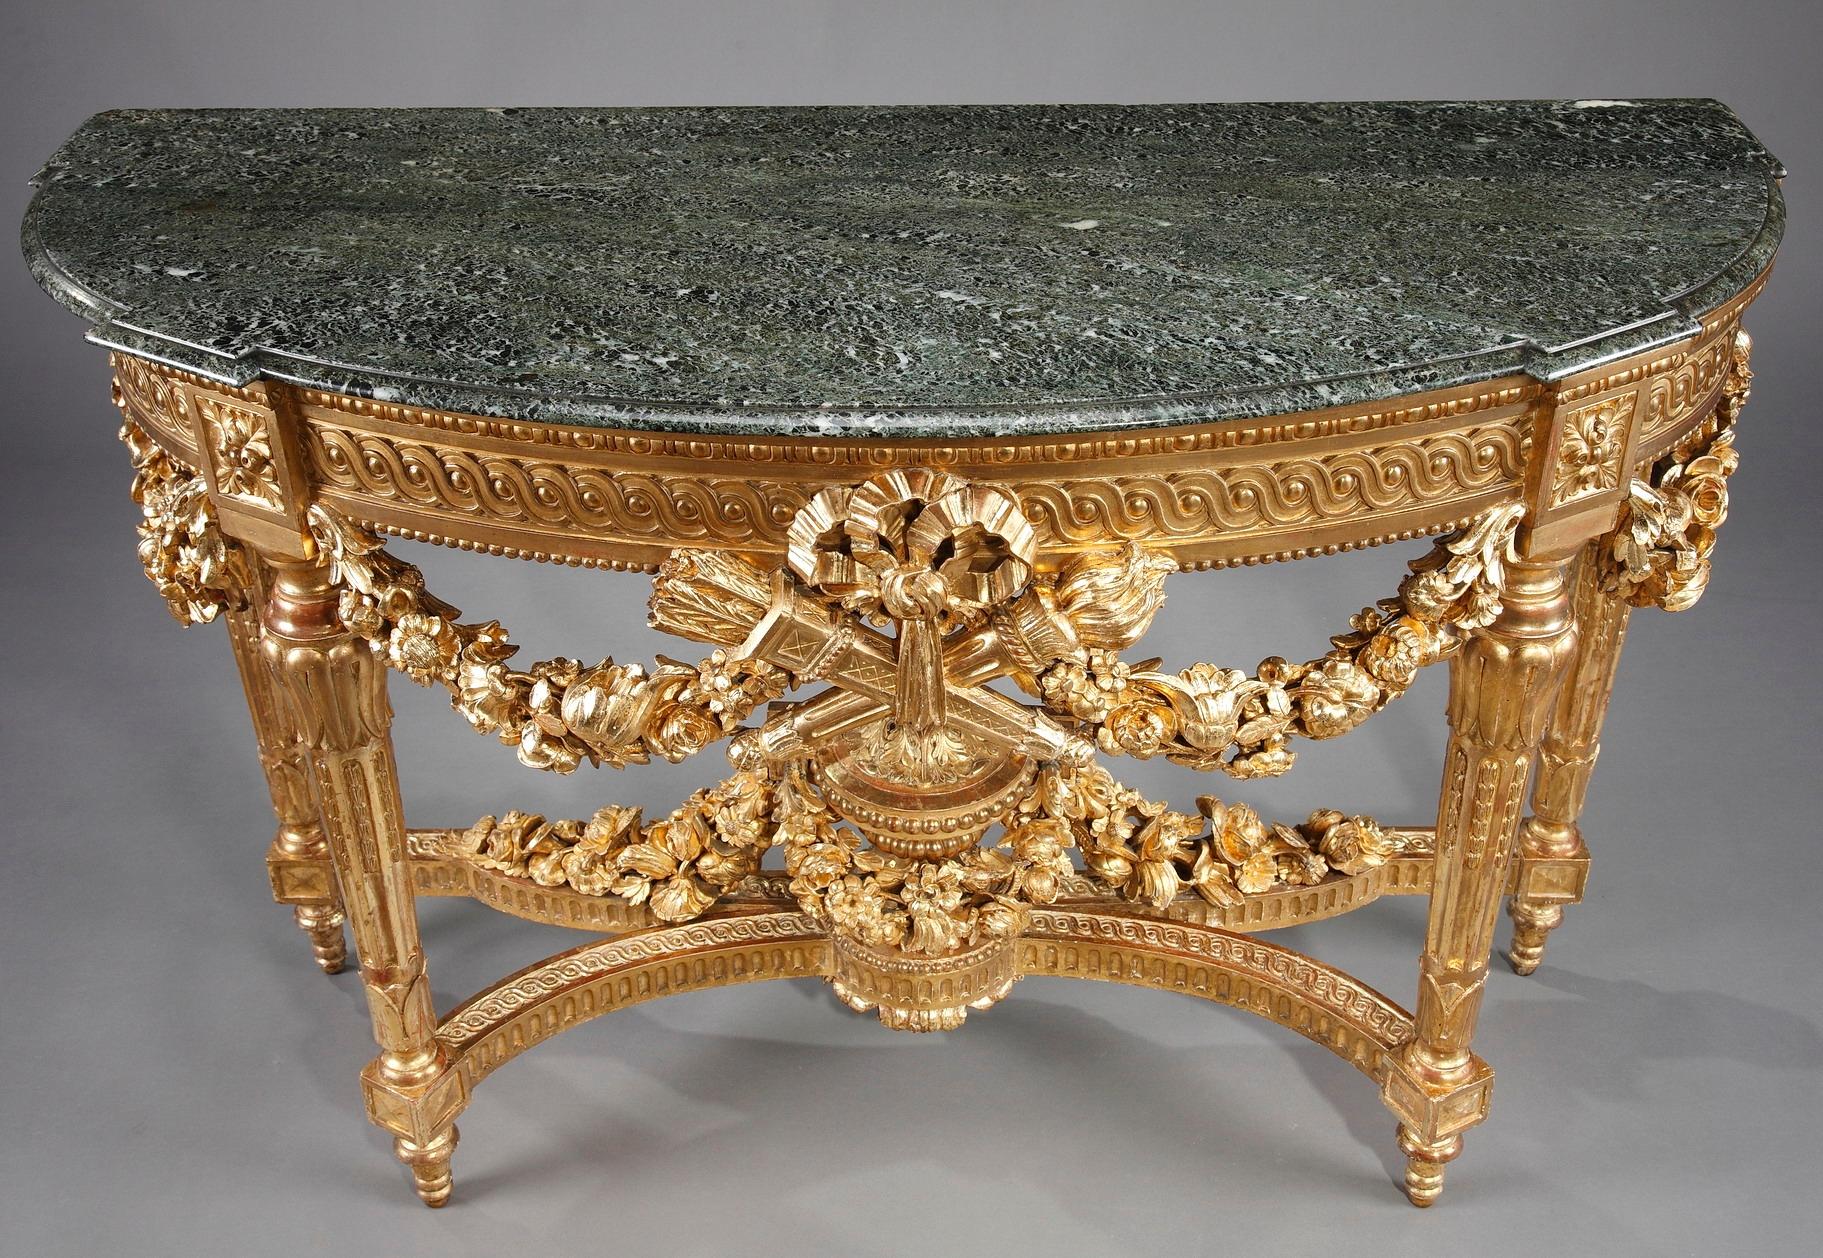 Fashioned in the Louis XVI style, this large refined giltwood console has an opulent decoration. Crafted of giltwood with a green vert-de-mer marble top, the half-moon table is lavishly bedecked with voluptuous garlands of flowers, antique vase,